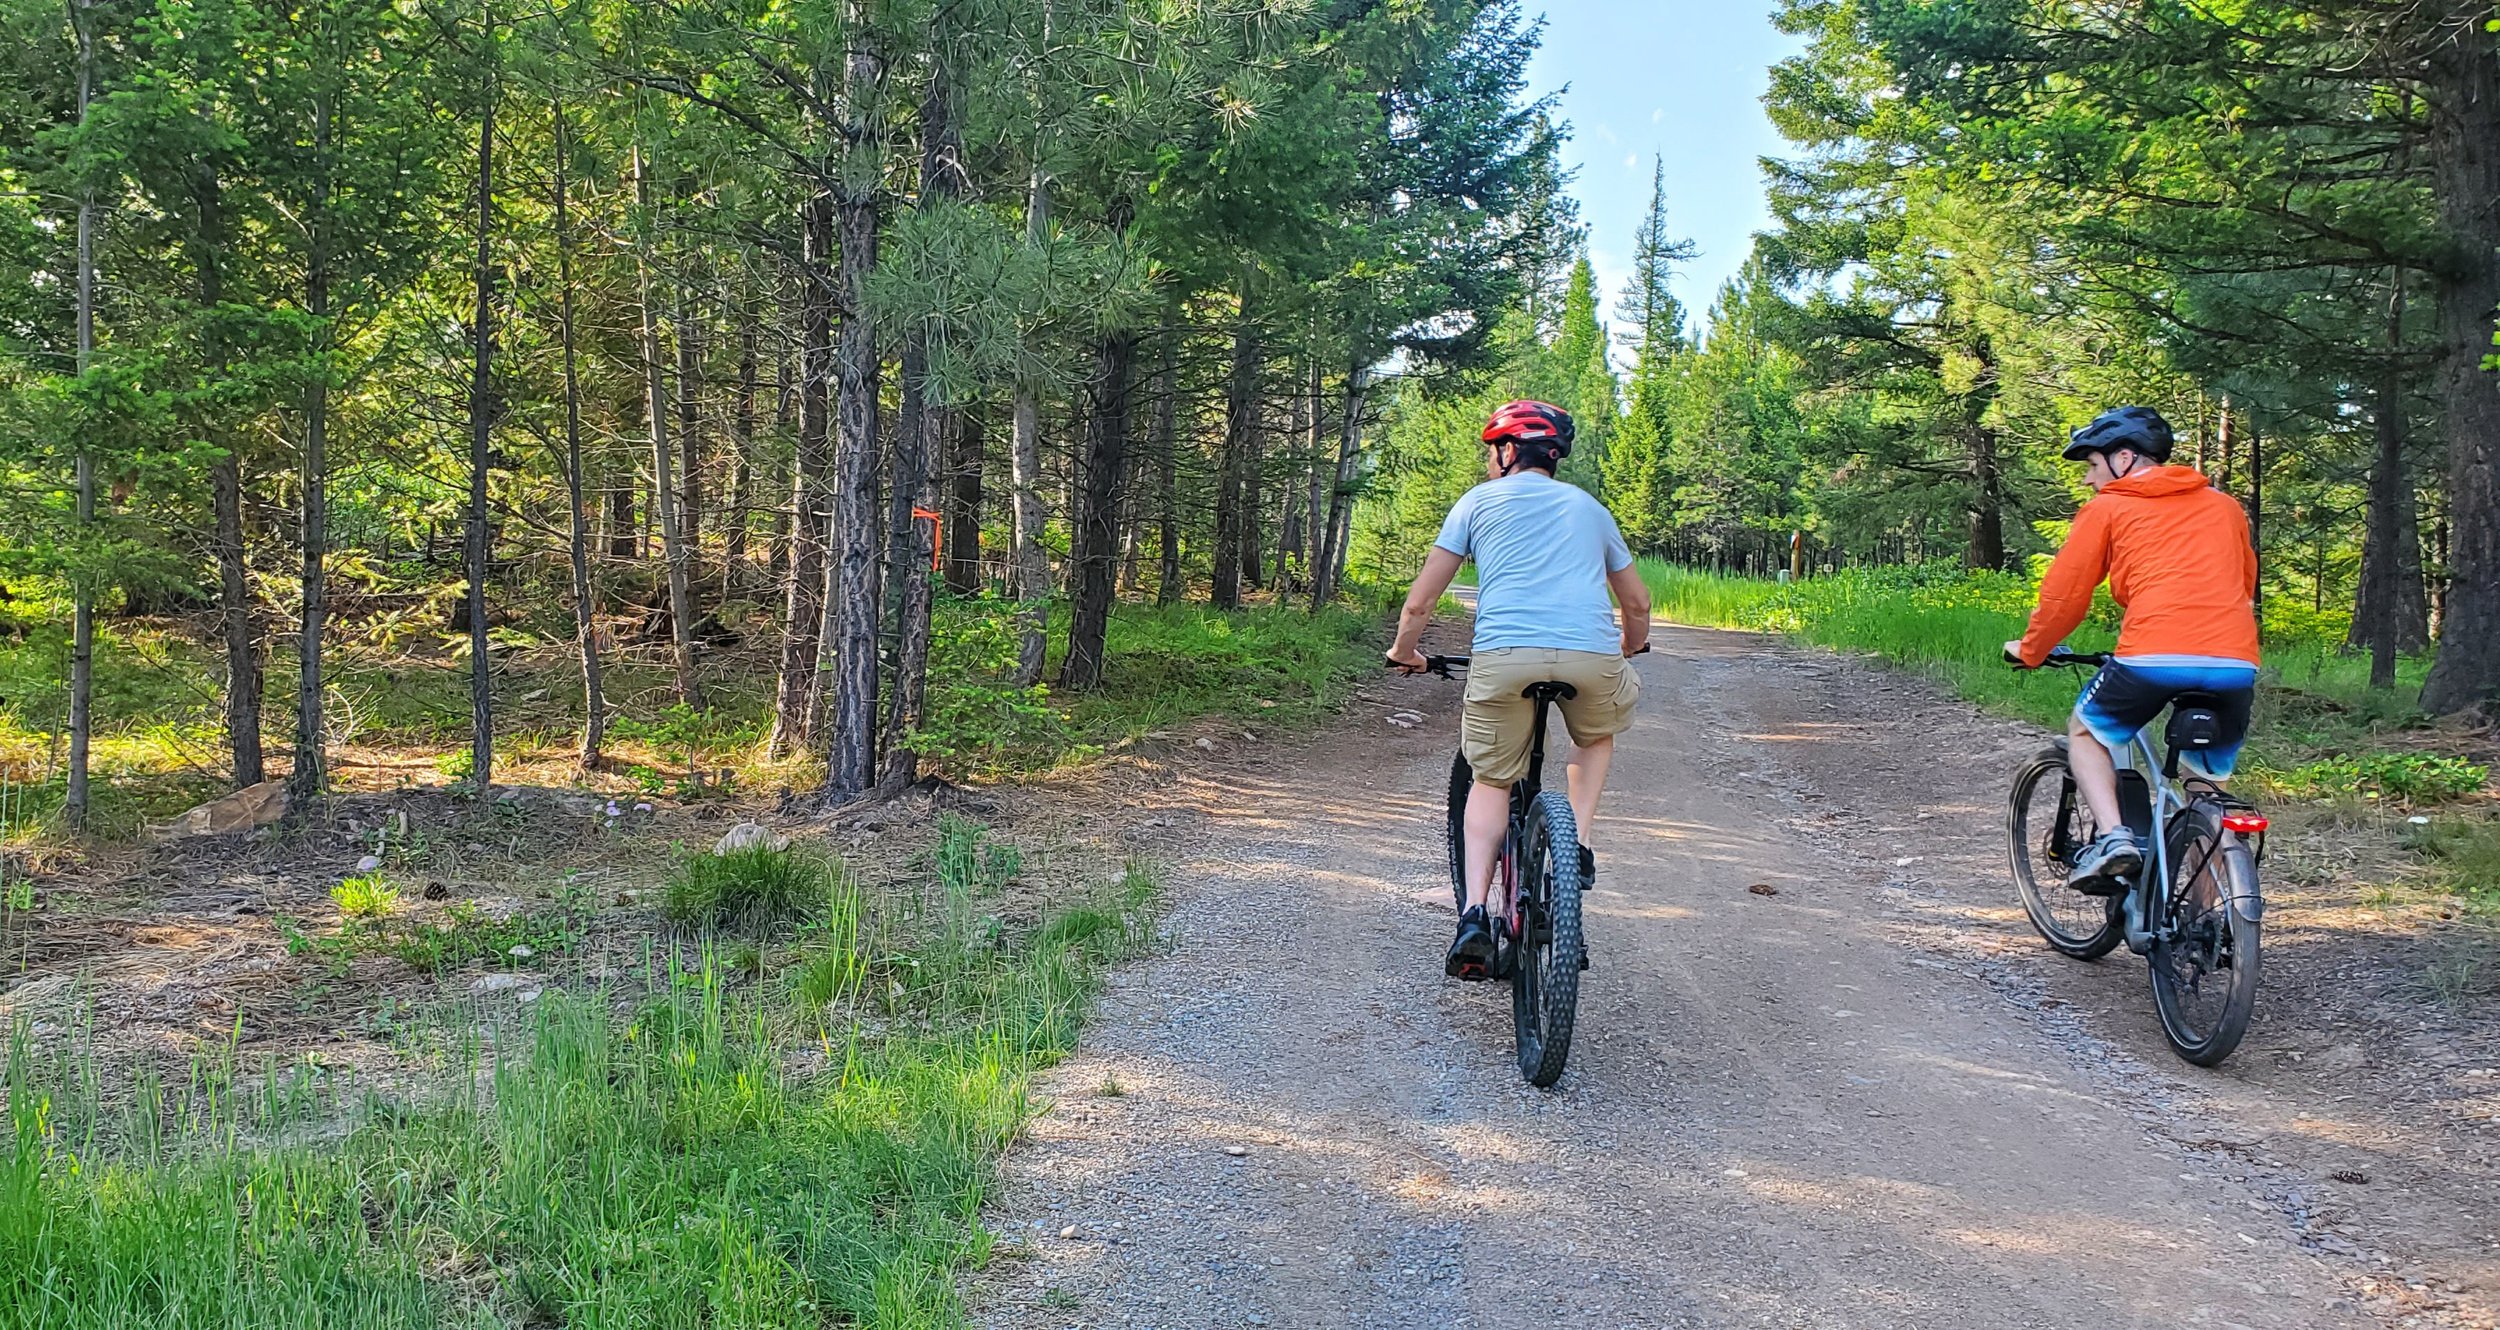 Mountain Biking Trails in the woods at The Hohnstead Glamping Cabins Resort near Missoula, Montana